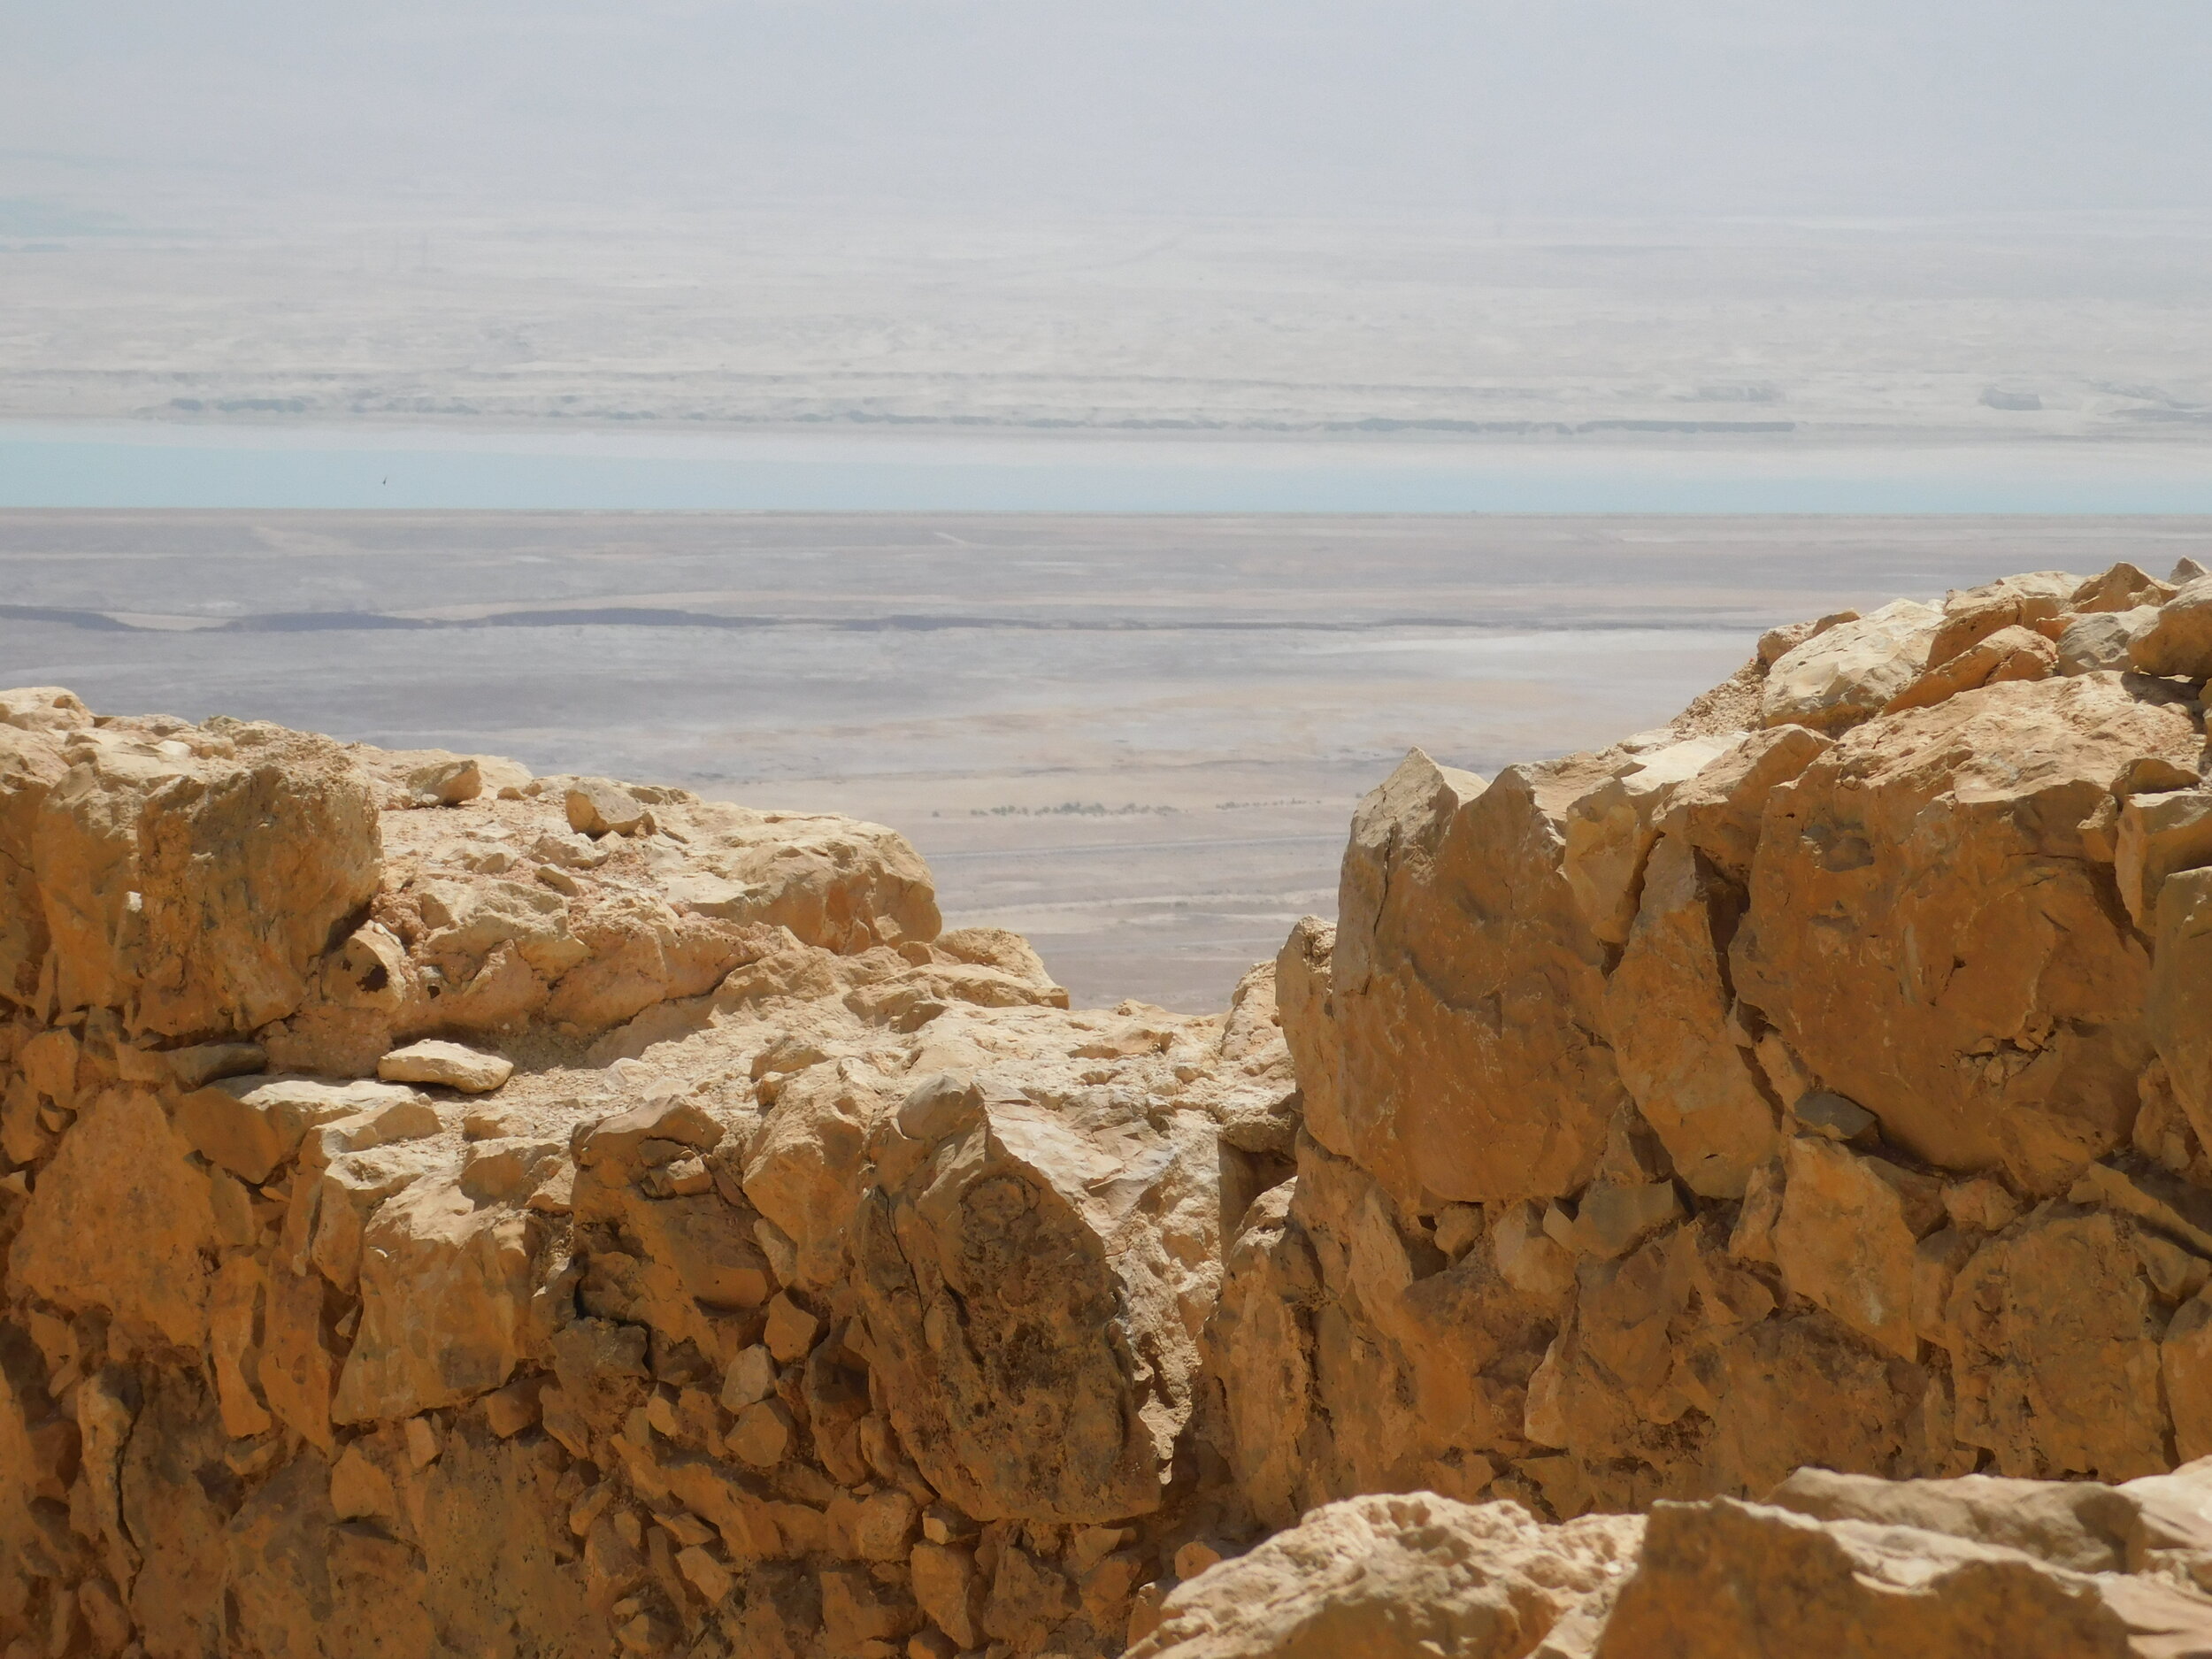  View of the Dead Sea from the top of Masada 